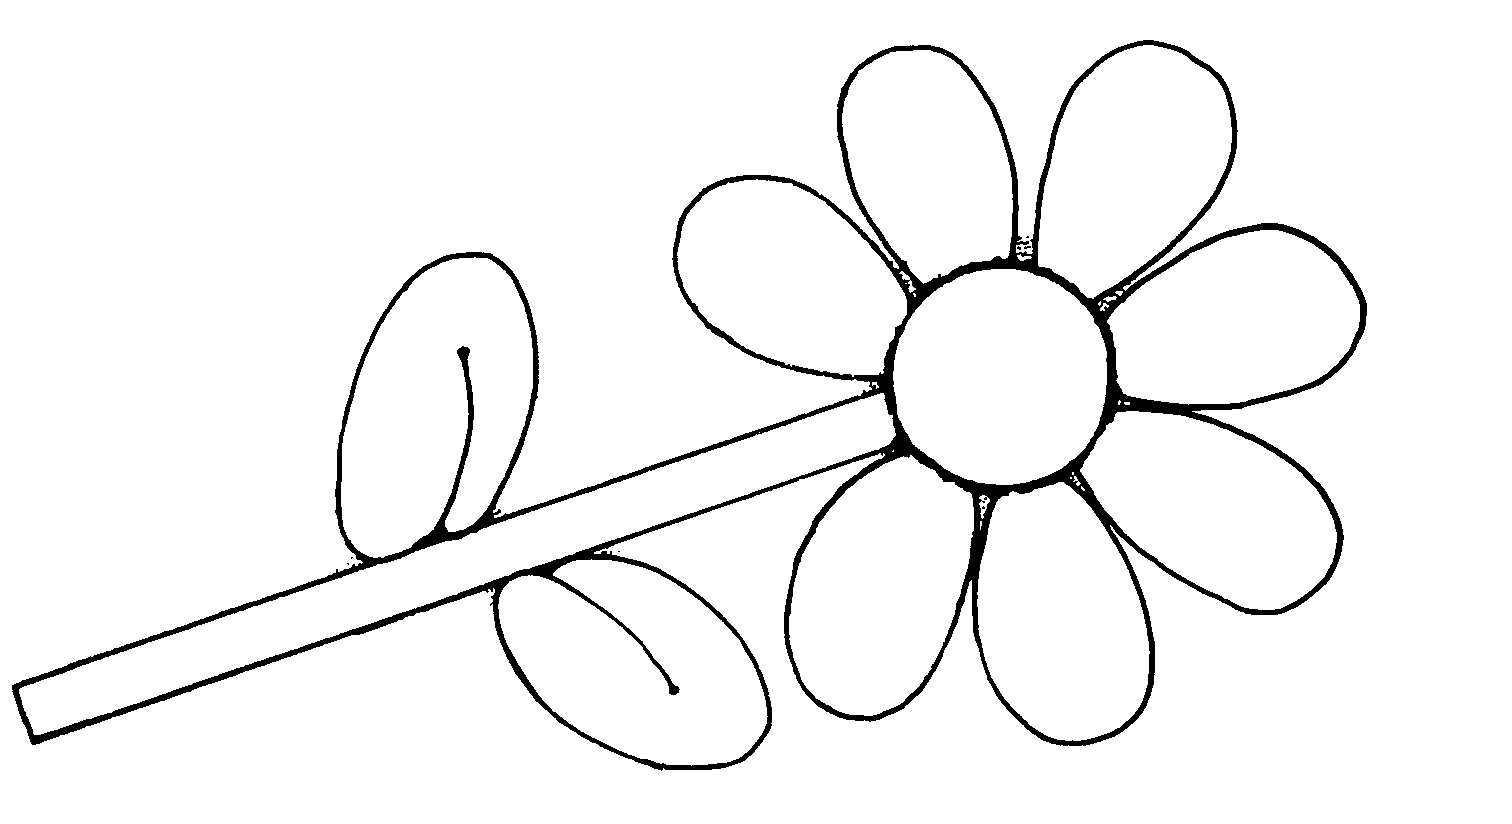 Flower  black and white flower clipart black and white free